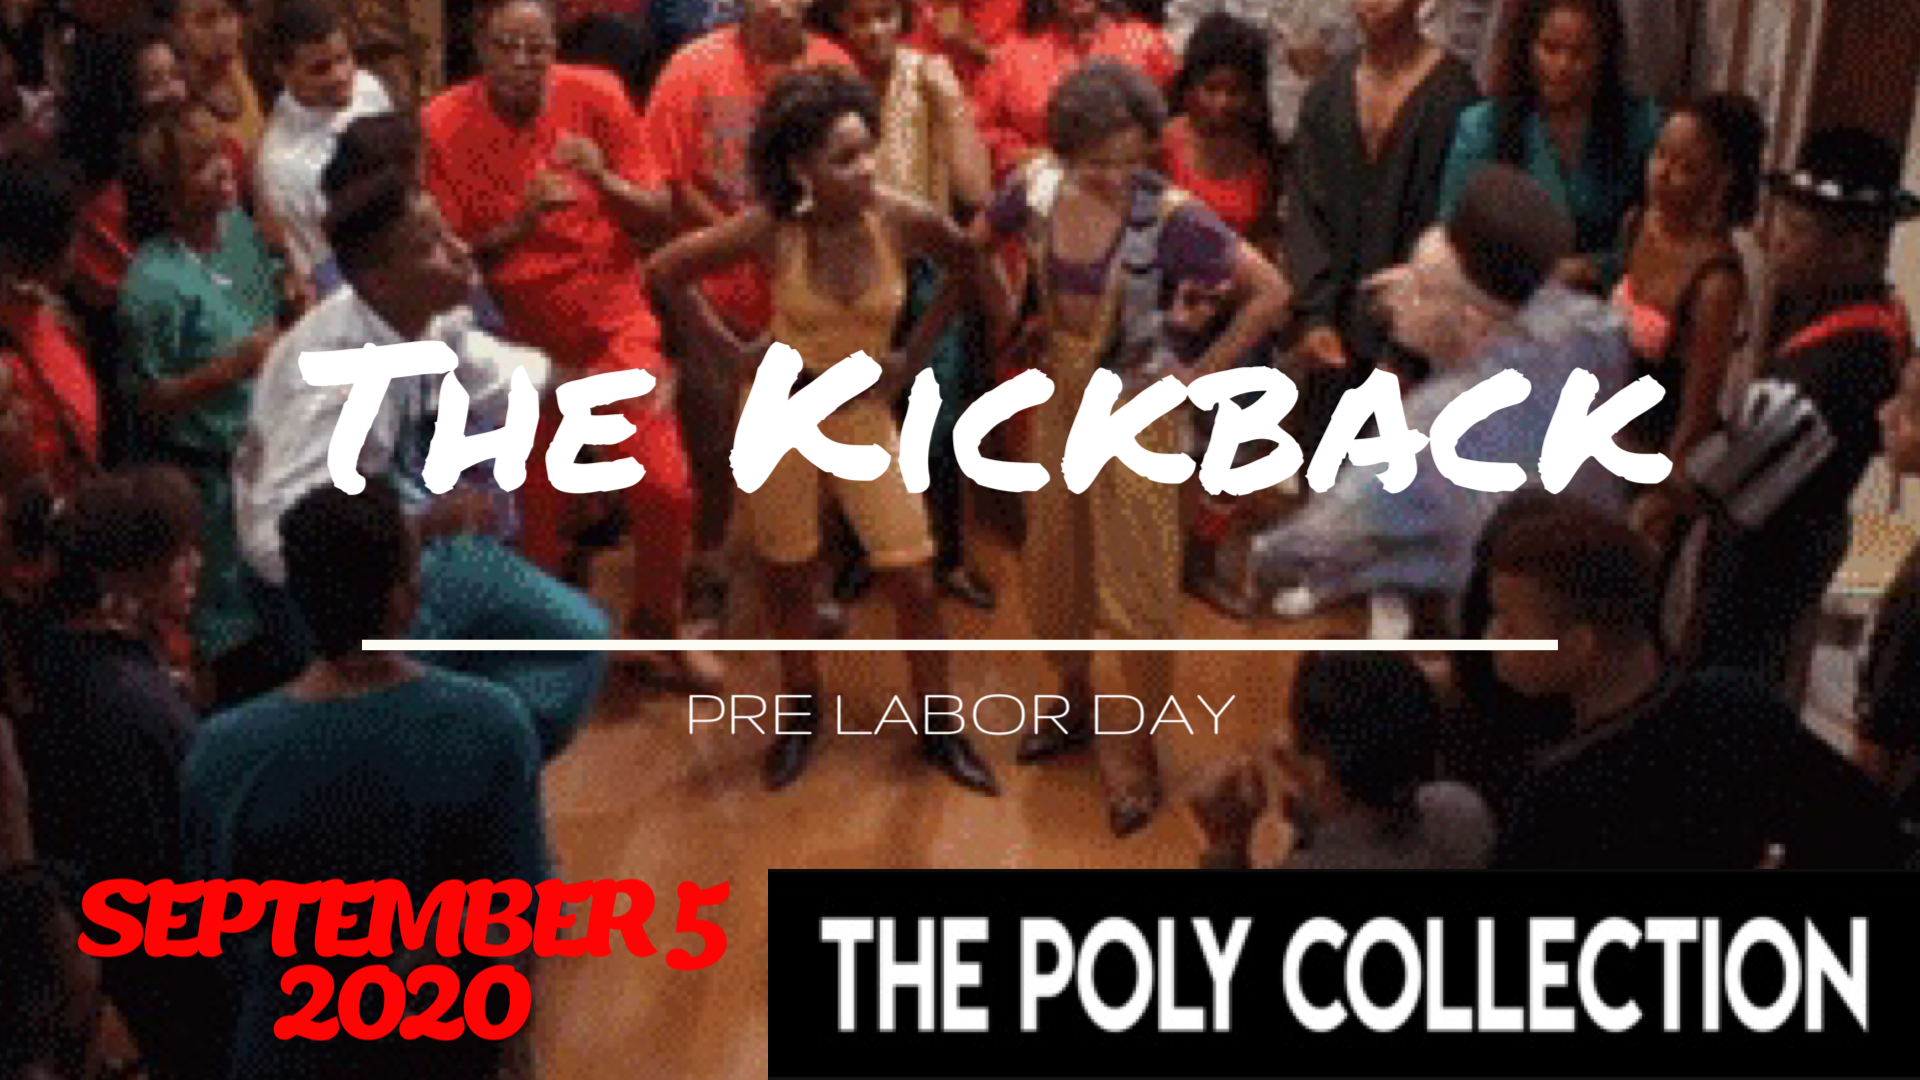 The Poly Collection Kickback